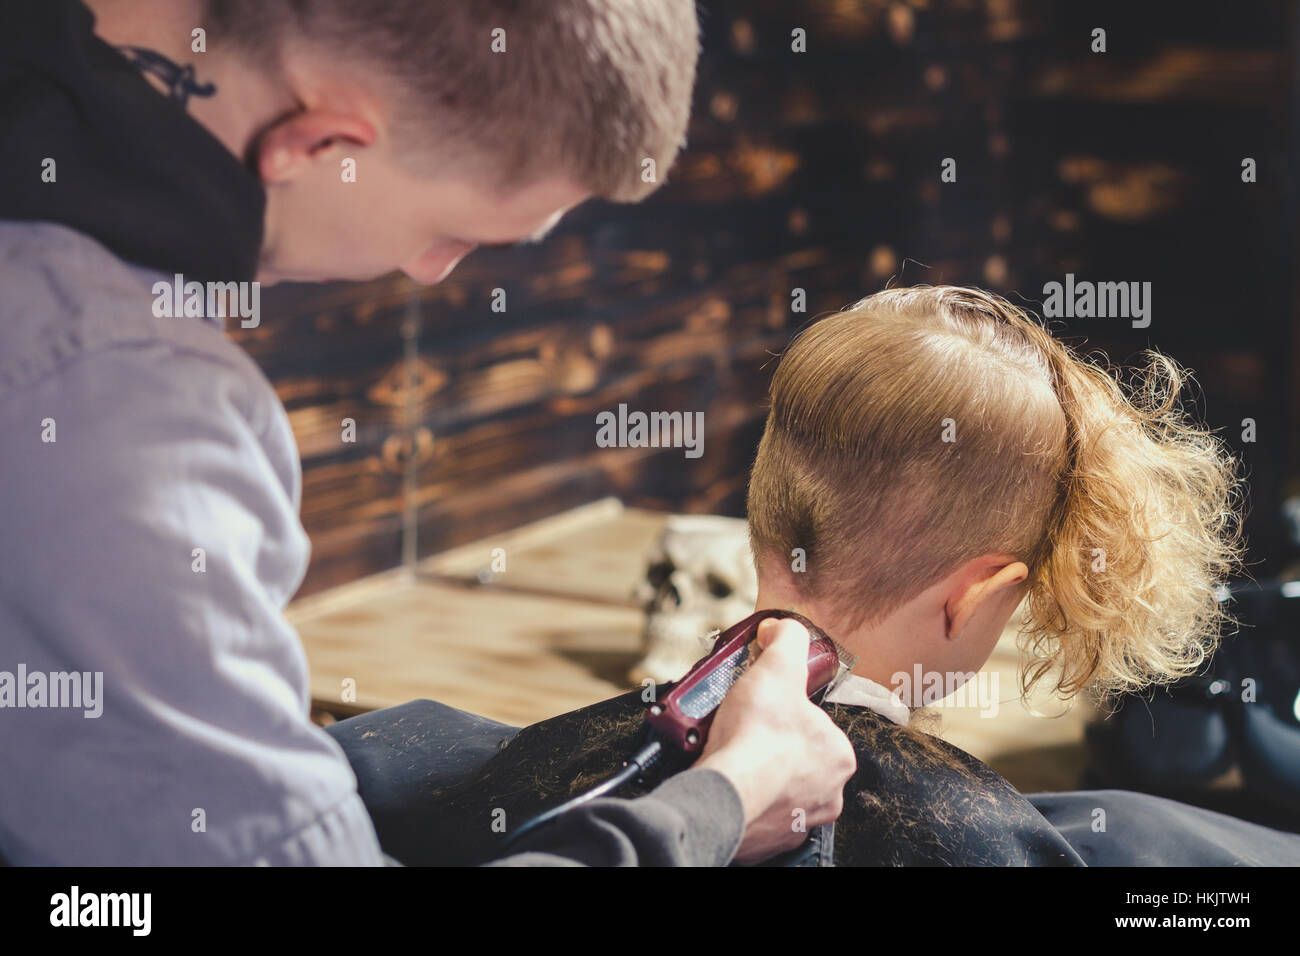 Little Boy Getting Haircut By Barber Stock Photo